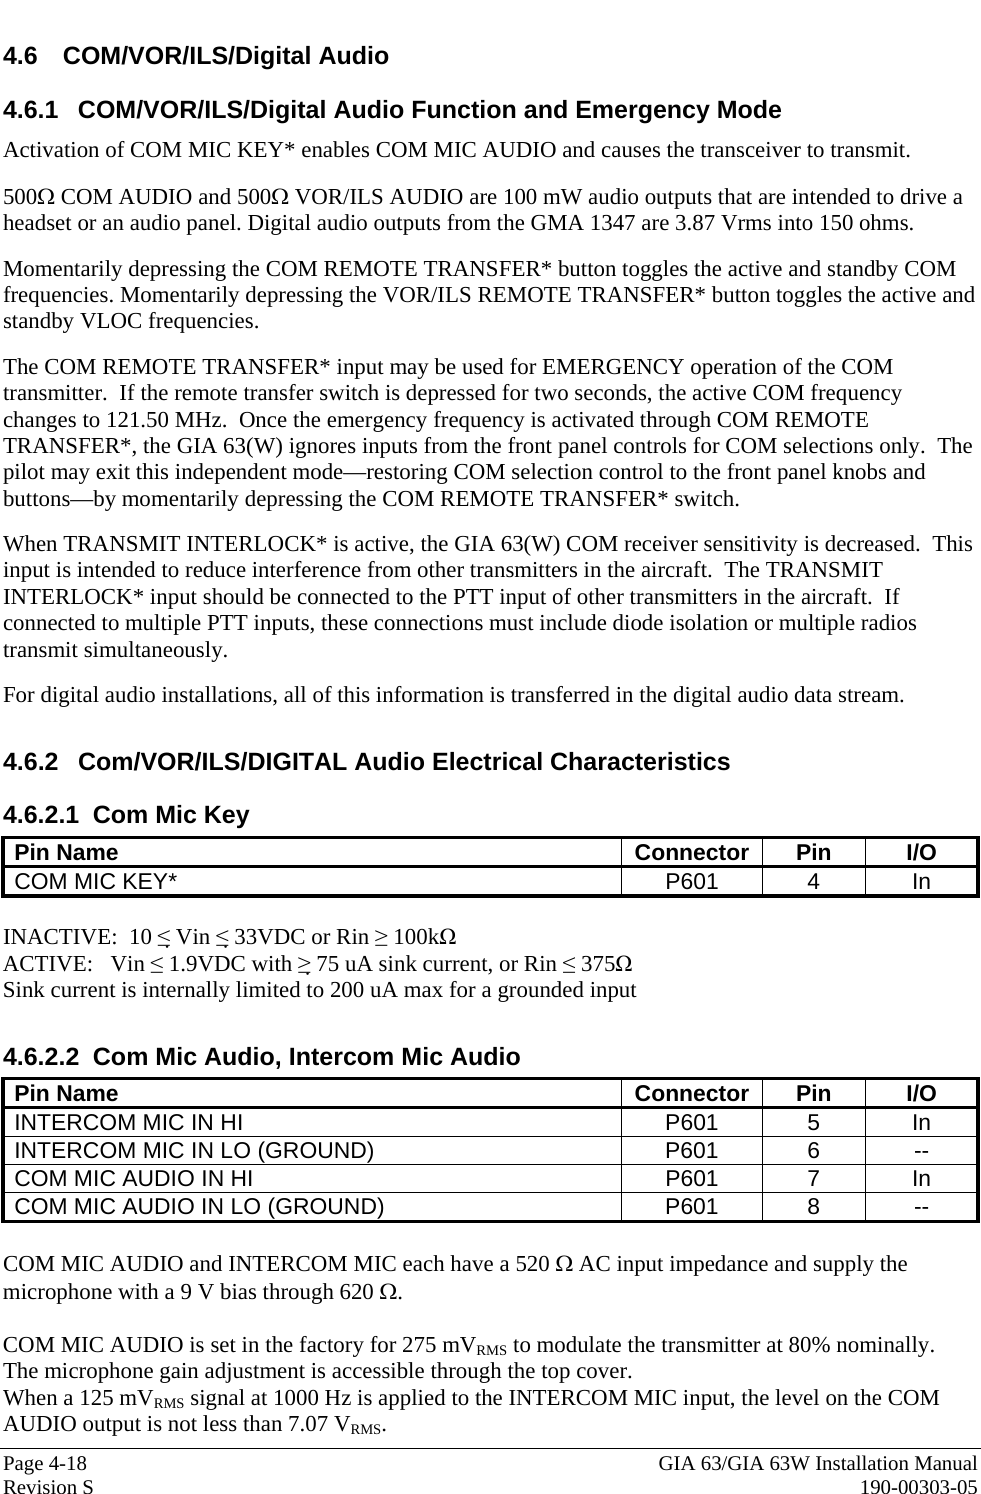  Page 4-18  GIA 63/GIA 63W Installation Manual Revision S  190-00303-05 4.6 COM/VOR/ILS/Digital Audio 4.6.1 COM/VOR/ILS/Digital Audio Function and Emergency Mode Activation of COM MIC KEY* enables COM MIC AUDIO and causes the transceiver to transmit.  500Ω COM AUDIO and 500Ω VOR/ILS AUDIO are 100 mW audio outputs that are intended to drive a headset or an audio panel. Digital audio outputs from the GMA 1347 are 3.87 Vrms into 150 ohms.  Momentarily depressing the COM REMOTE TRANSFER* button toggles the active and standby COM frequencies. Momentarily depressing the VOR/ILS REMOTE TRANSFER* button toggles the active and standby VLOC frequencies.  The COM REMOTE TRANSFER* input may be used for EMERGENCY operation of the COM transmitter.  If the remote transfer switch is depressed for two seconds, the active COM frequency changes to 121.50 MHz.  Once the emergency frequency is activated through COM REMOTE TRANSFER*, the GIA 63(W) ignores inputs from the front panel controls for COM selections only.  The pilot may exit this independent mode—restoring COM selection control to the front panel knobs and buttons—by momentarily depressing the COM REMOTE TRANSFER* switch.  When TRANSMIT INTERLOCK* is active, the GIA 63(W) COM receiver sensitivity is decreased.  This input is intended to reduce interference from other transmitters in the aircraft.  The TRANSMIT INTERLOCK* input should be connected to the PTT input of other transmitters in the aircraft.  If connected to multiple PTT inputs, these connections must include diode isolation or multiple radios transmit simultaneously.  For digital audio installations, all of this information is transferred in the digital audio data stream.  4.6.2 Com/VOR/ILS/DIGITAL Audio Electrical Characteristics 4.6.2.1 Com Mic Key Pin Name  Connector  Pin  I/O COM MIC KEY*  P601  4  In  INACTIVE:  10 ≤ Vin ≤ 33VDC or Rin ≥ 100kΩ   ACTIVE:   Vin ≤ 1.9VDC with ≥ 75 uA sink current, or Rin ≤ 375Ω  Sink current is internally limited to 200 uA max for a grounded input   4.6.2.2 Com Mic Audio, Intercom Mic Audio Pin Name  Connector  Pin  I/O INTERCOM MIC IN HI  P601  5  In INTERCOM MIC IN LO (GROUND)  P601  6  -- COM MIC AUDIO IN HI  P601  7  In COM MIC AUDIO IN LO (GROUND)  P601  8  --  COM MIC AUDIO and INTERCOM MIC each have a 520 Ω AC input impedance and supply the microphone with a 9 V bias through 620 Ω.  COM MIC AUDIO is set in the factory for 275 mVRMS to modulate the transmitter at 80% nominally.  The microphone gain adjustment is accessible through the top cover. When a 125 mVRMS signal at 1000 Hz is applied to the INTERCOM MIC input, the level on the COM AUDIO output is not less than 7.07 VRMS. 